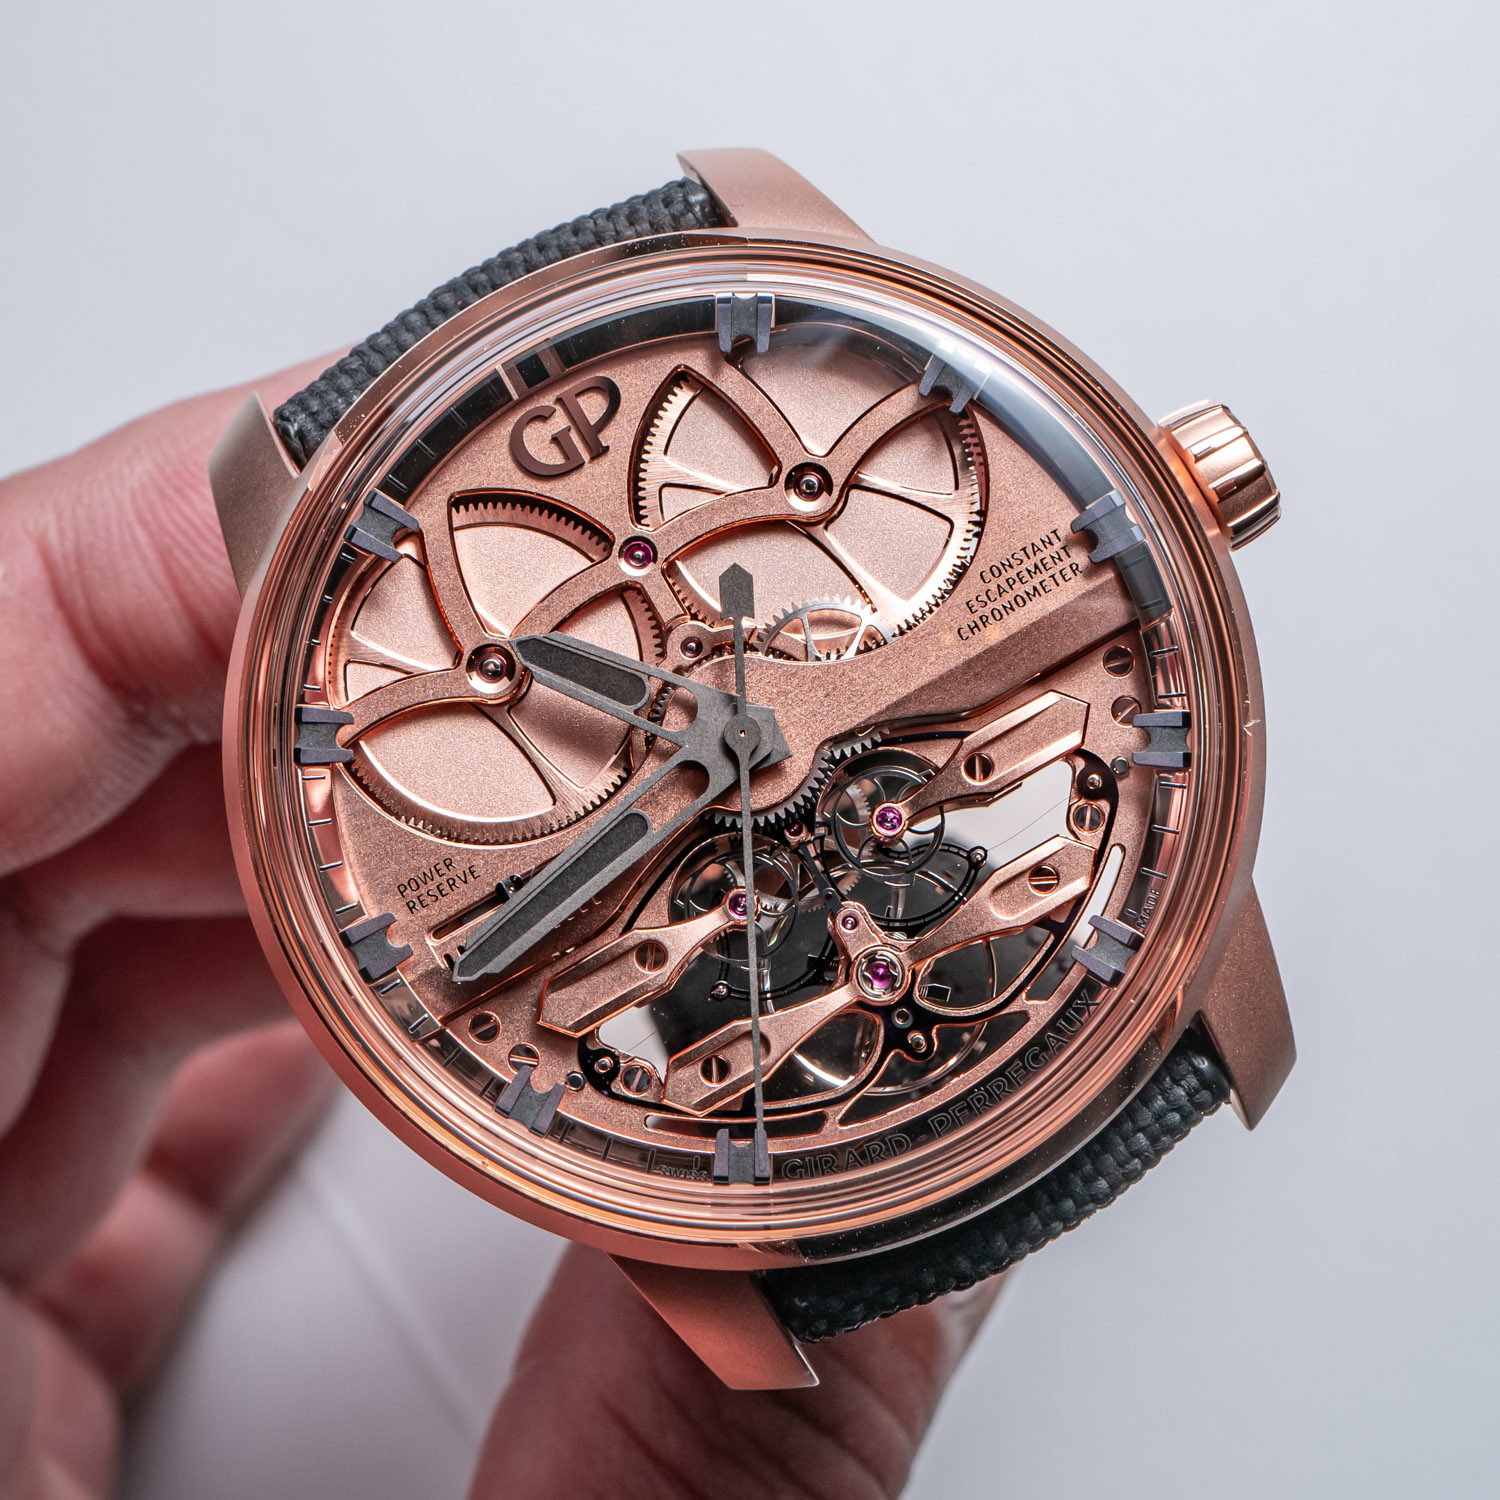 Hands-On Debut: Girard-Perregaux Neo Constant Escapement Only Watch Edition